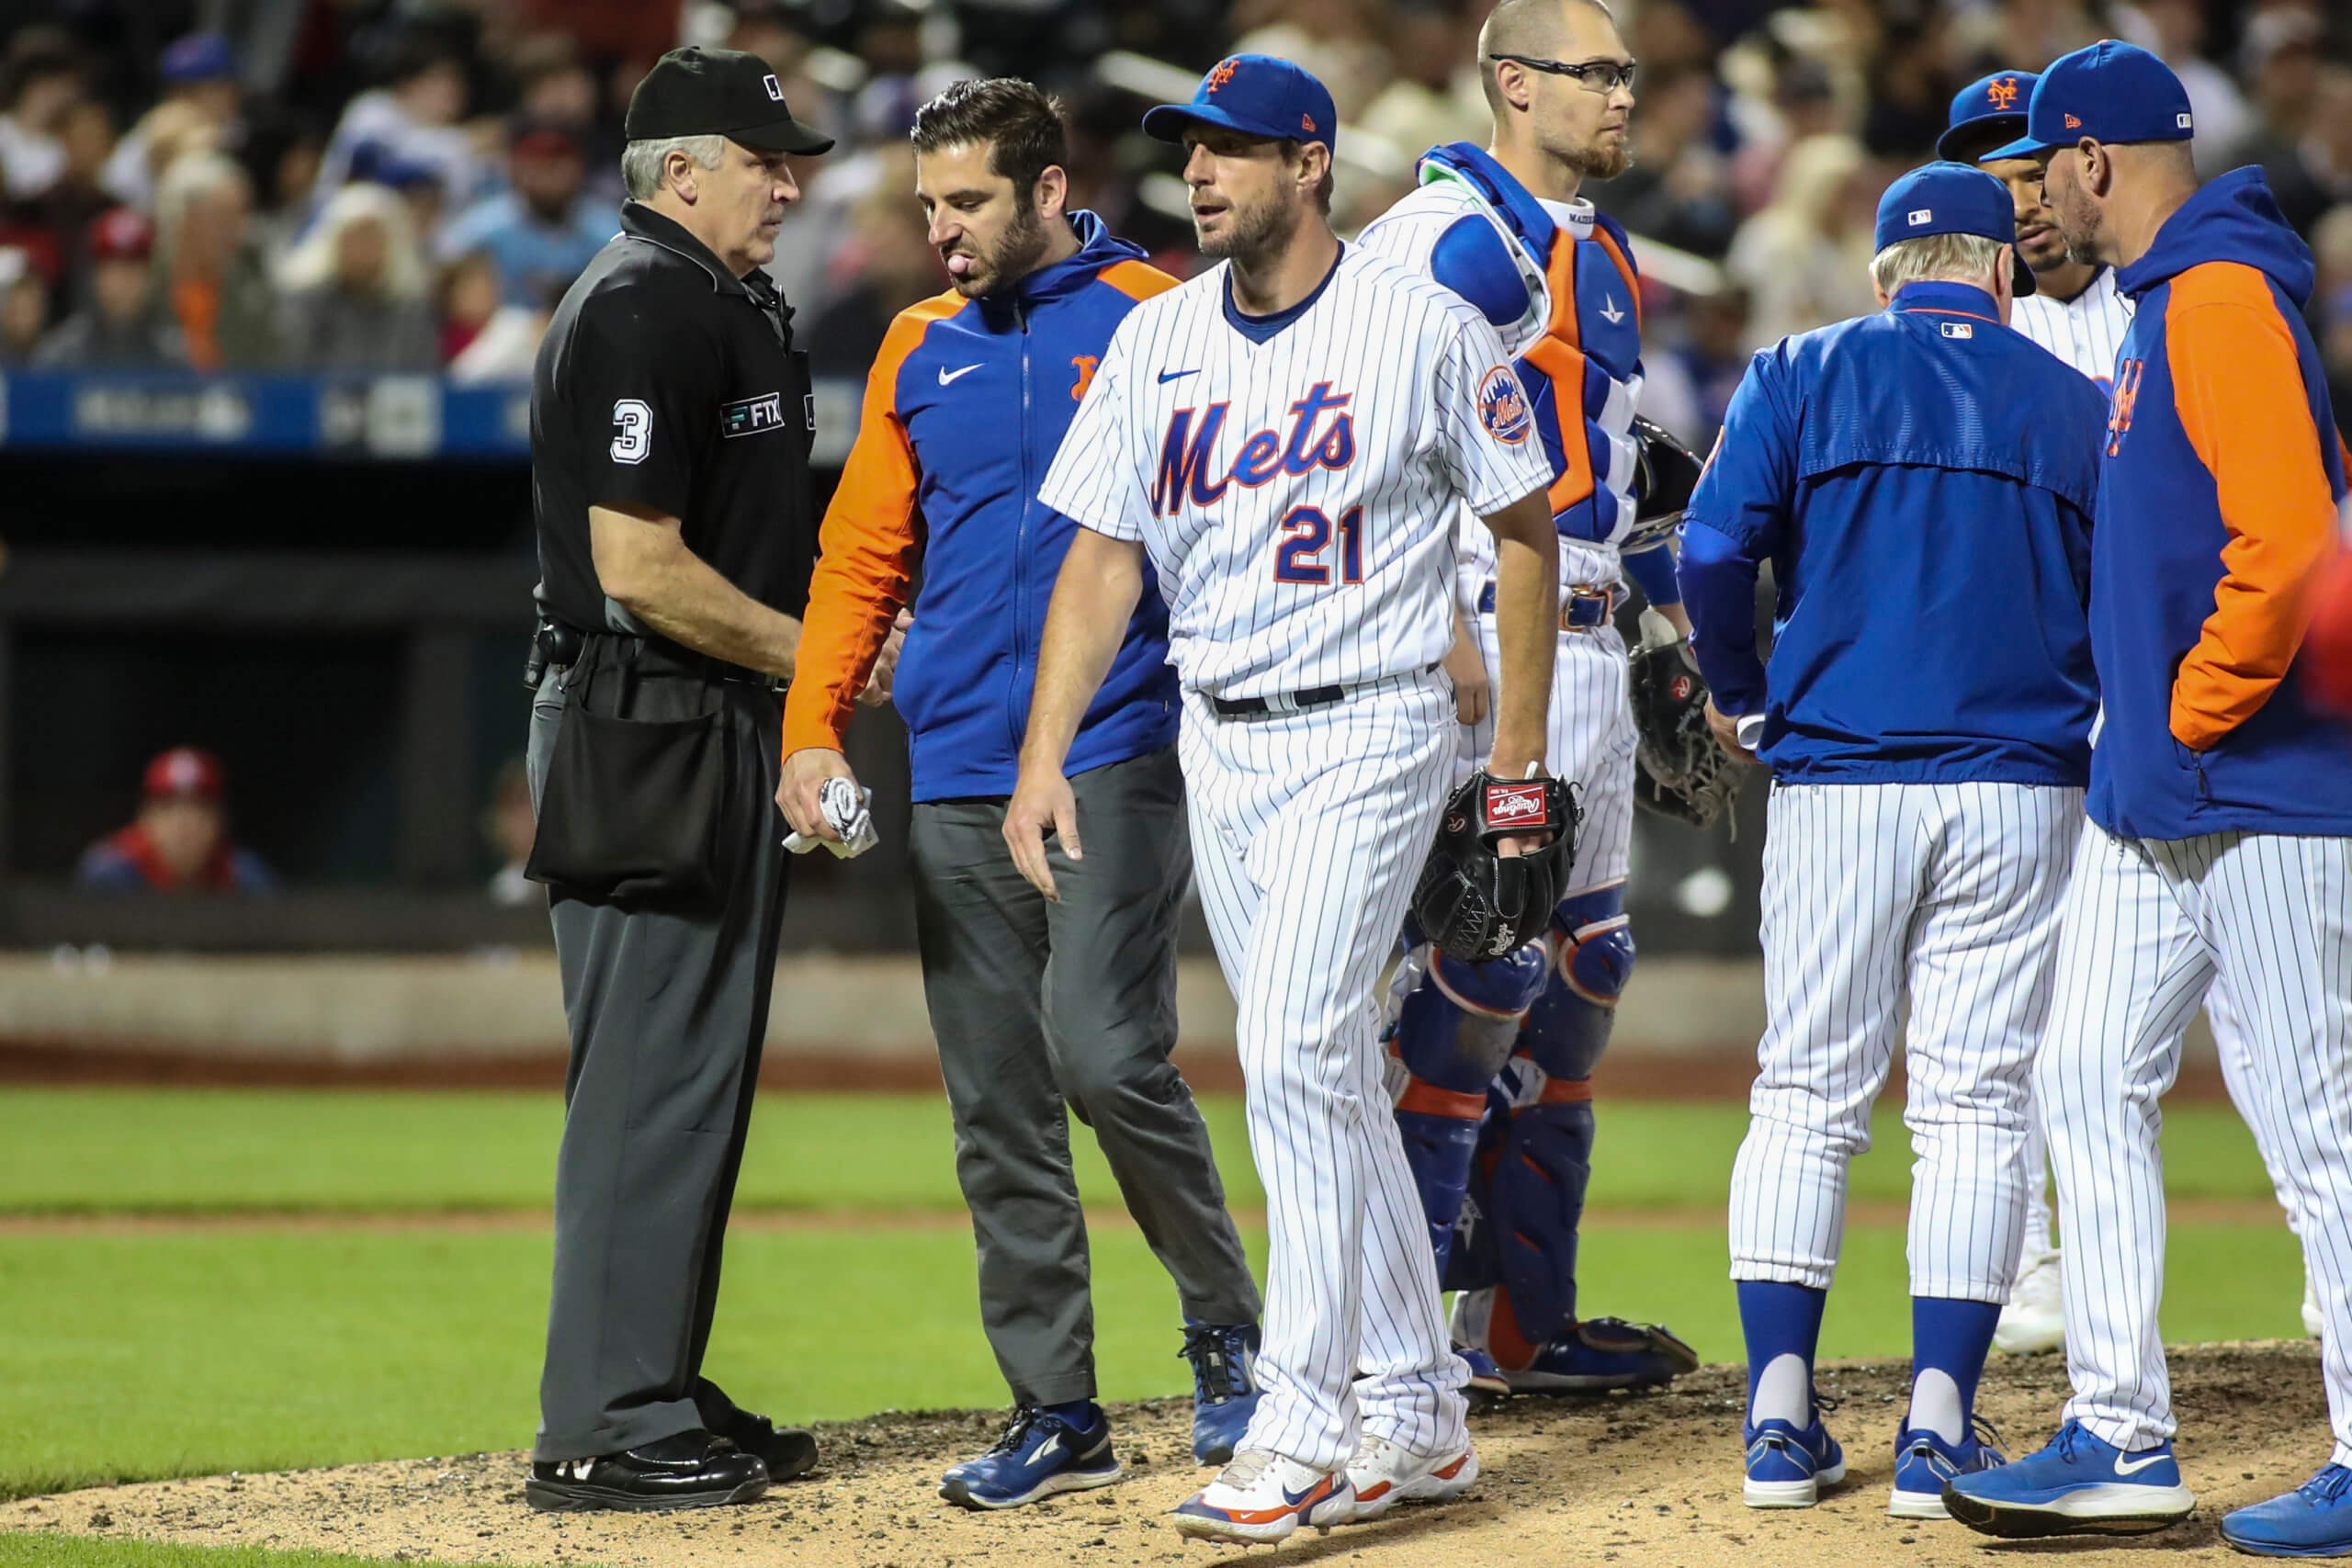 Max Scherzer injury: Mets ace out 6-8 weeks with oblique strain